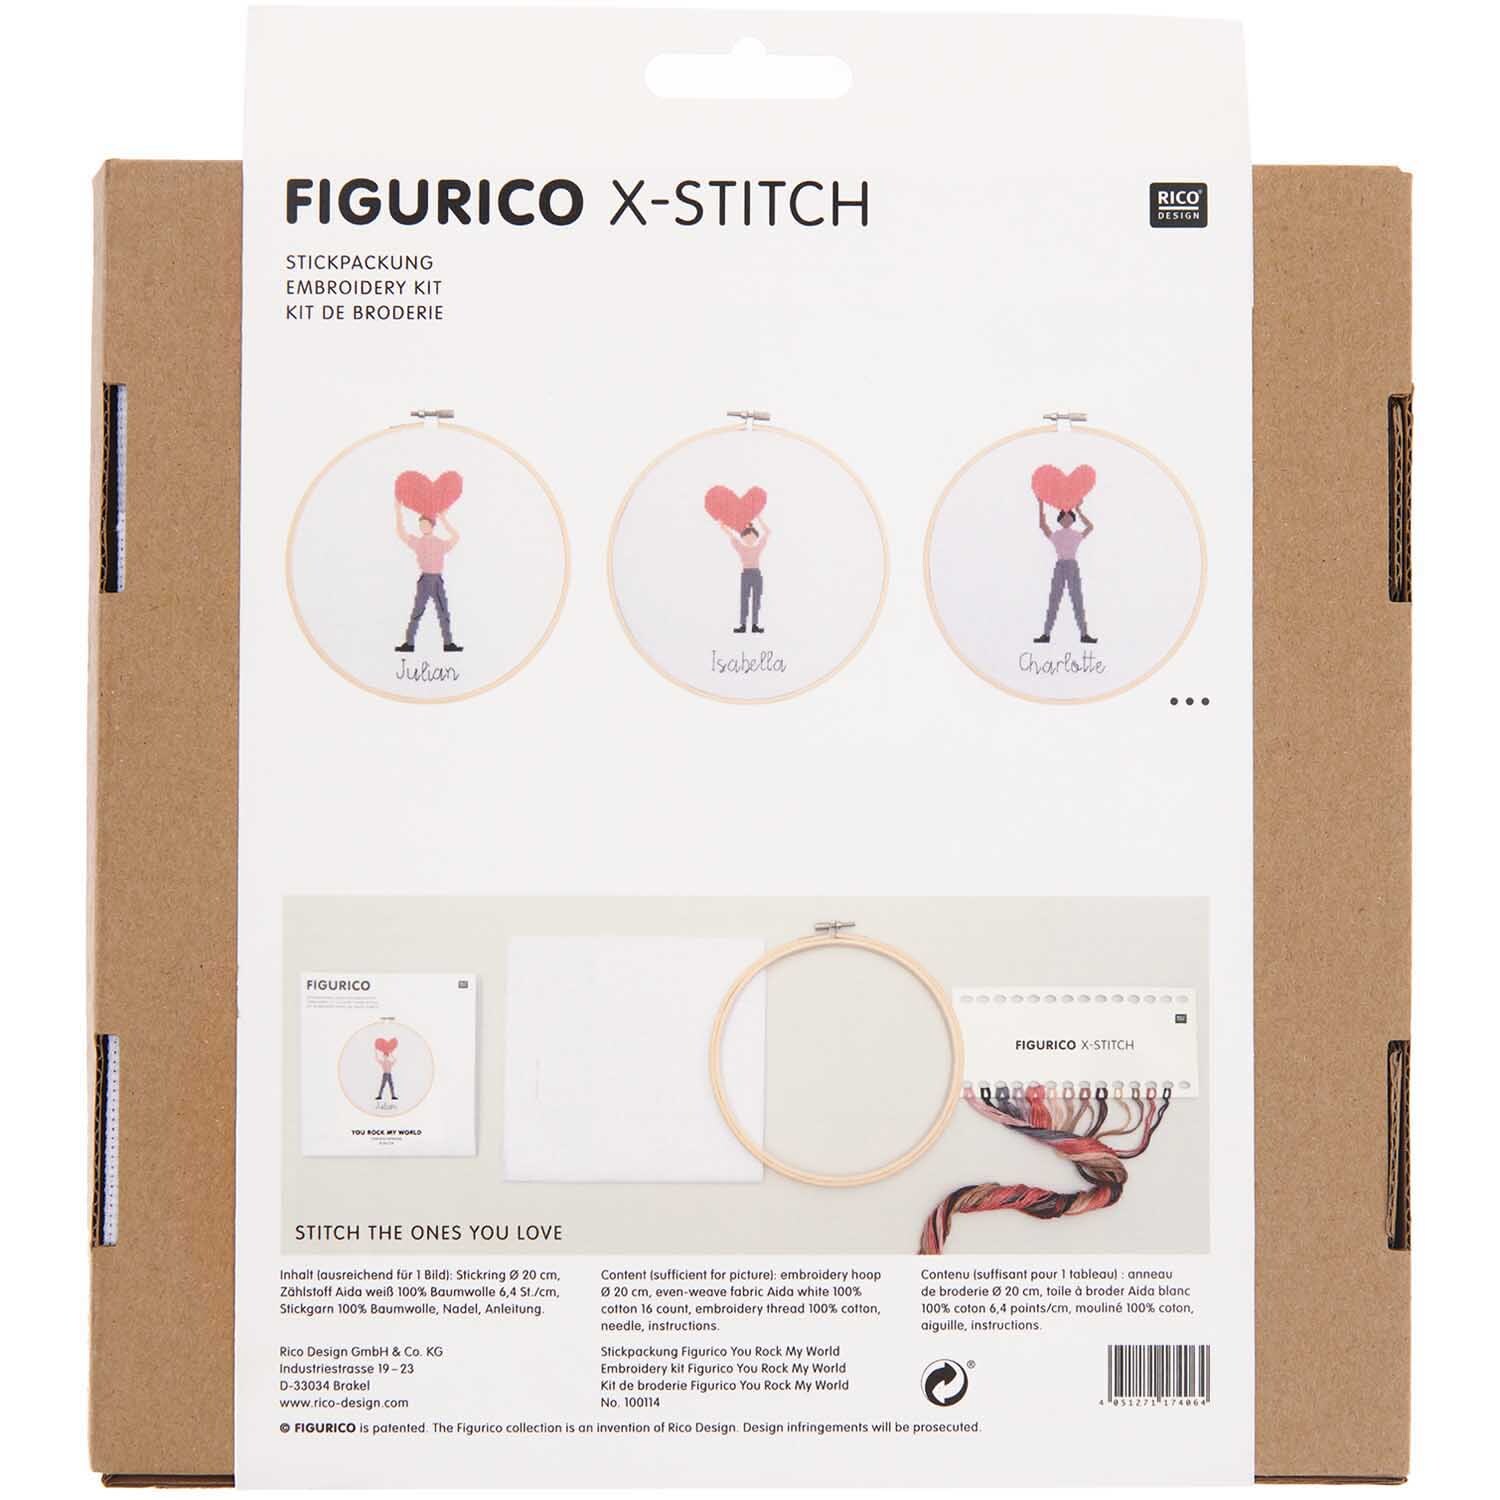 Figurico Stickpackung You Rock My World 20cm